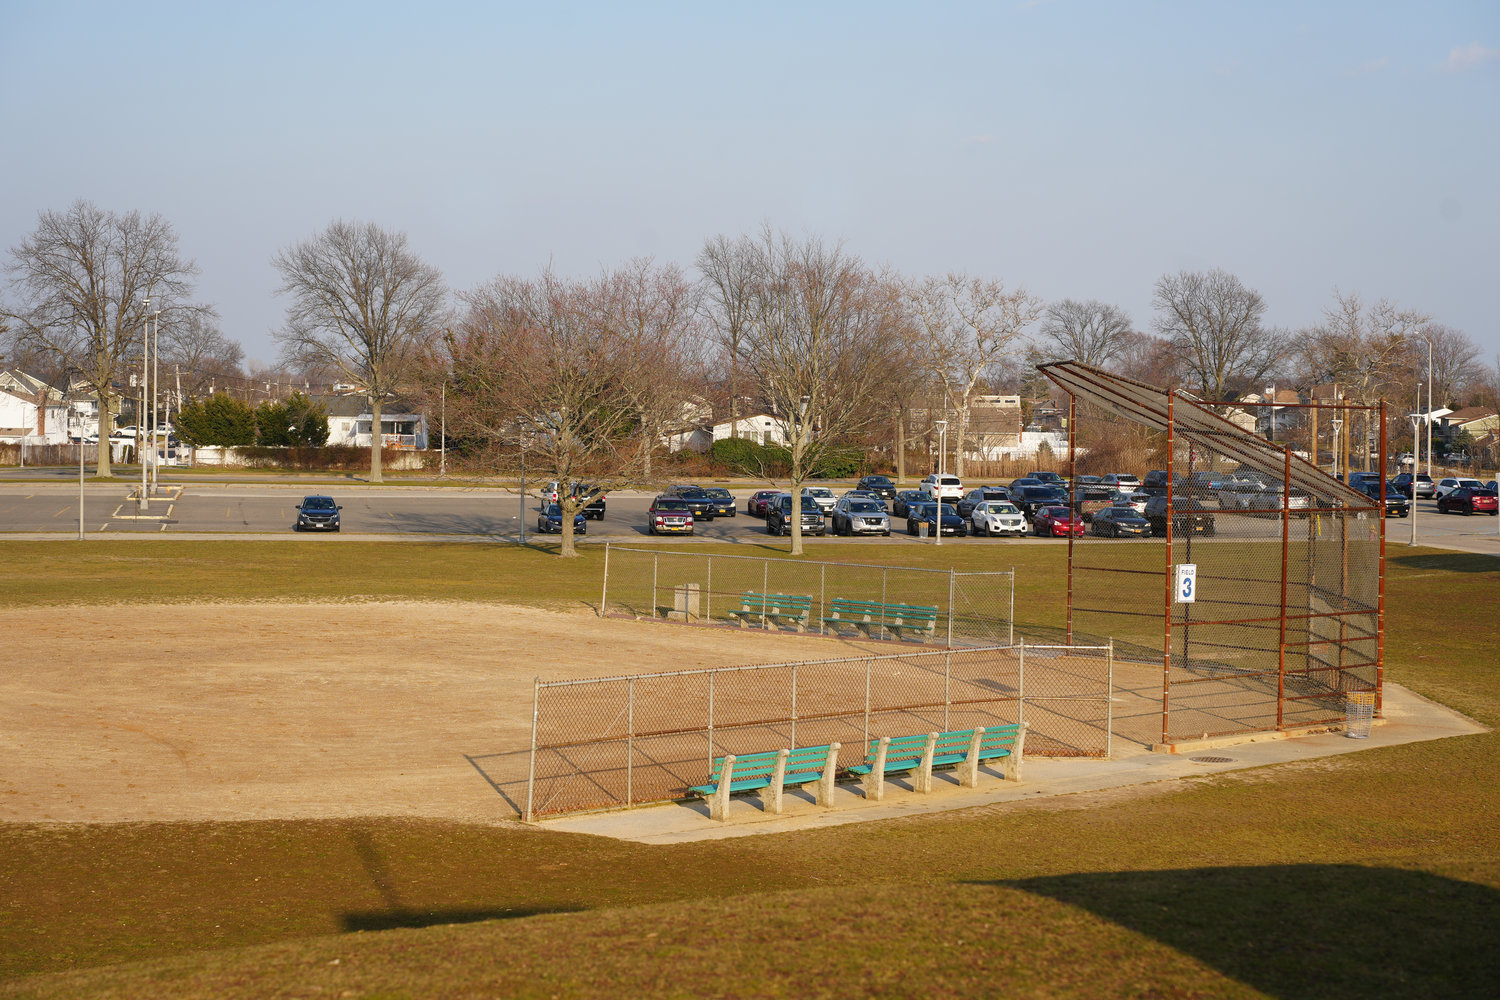 The tennis courts are set to be renovated, and pickleball courts will be installed.